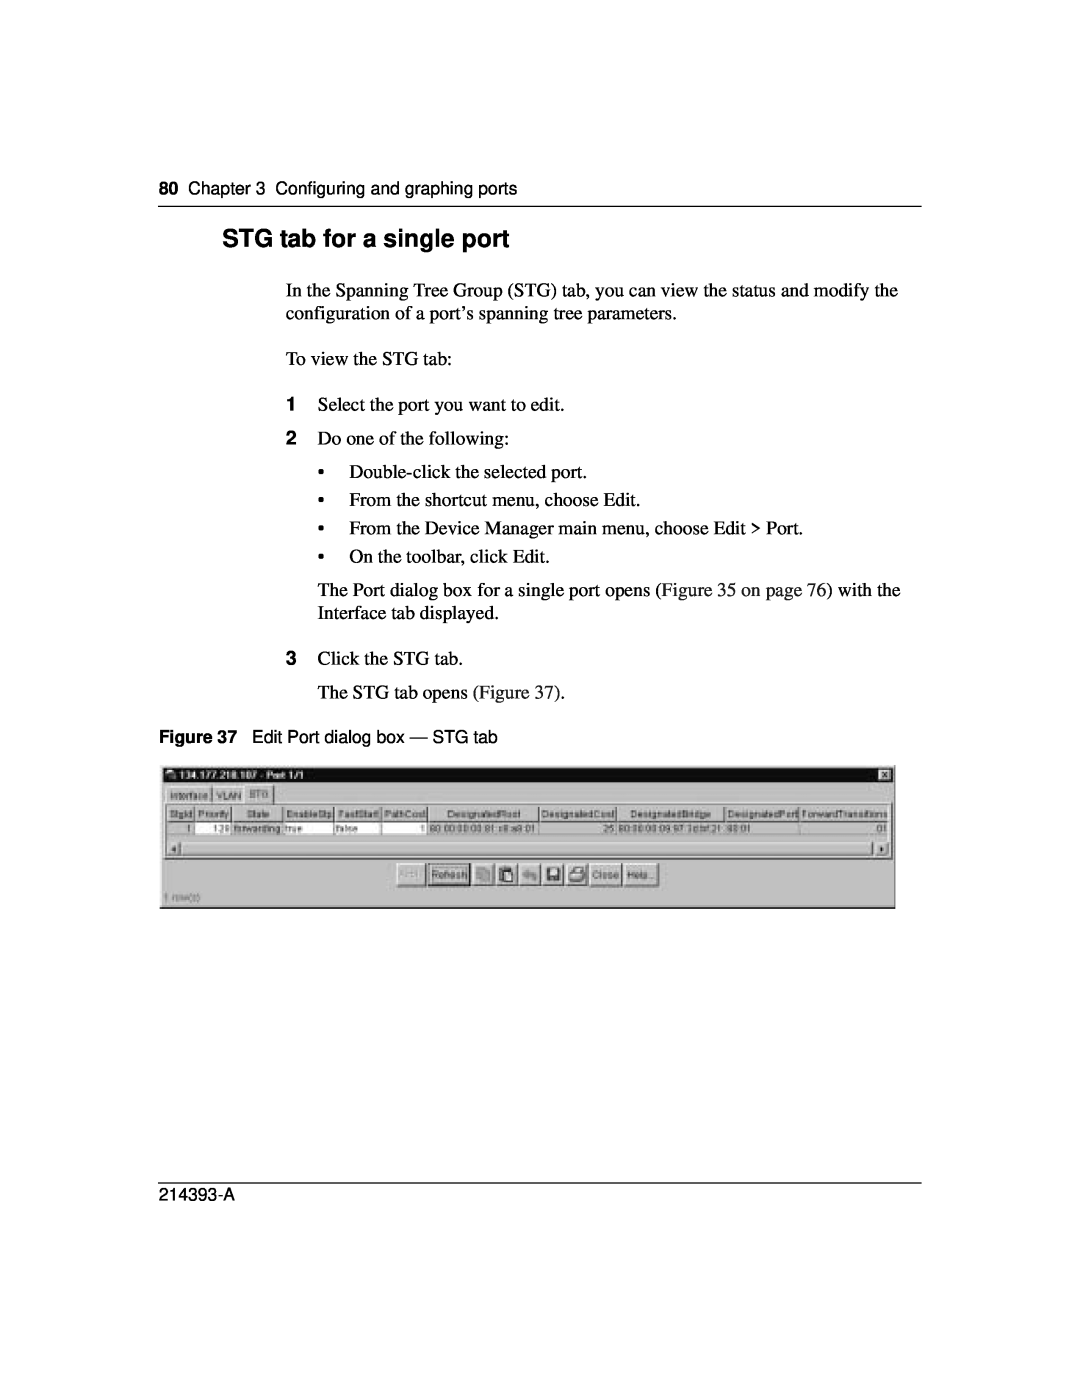 Nortel Networks 214393-A manual STG tab for a single port 